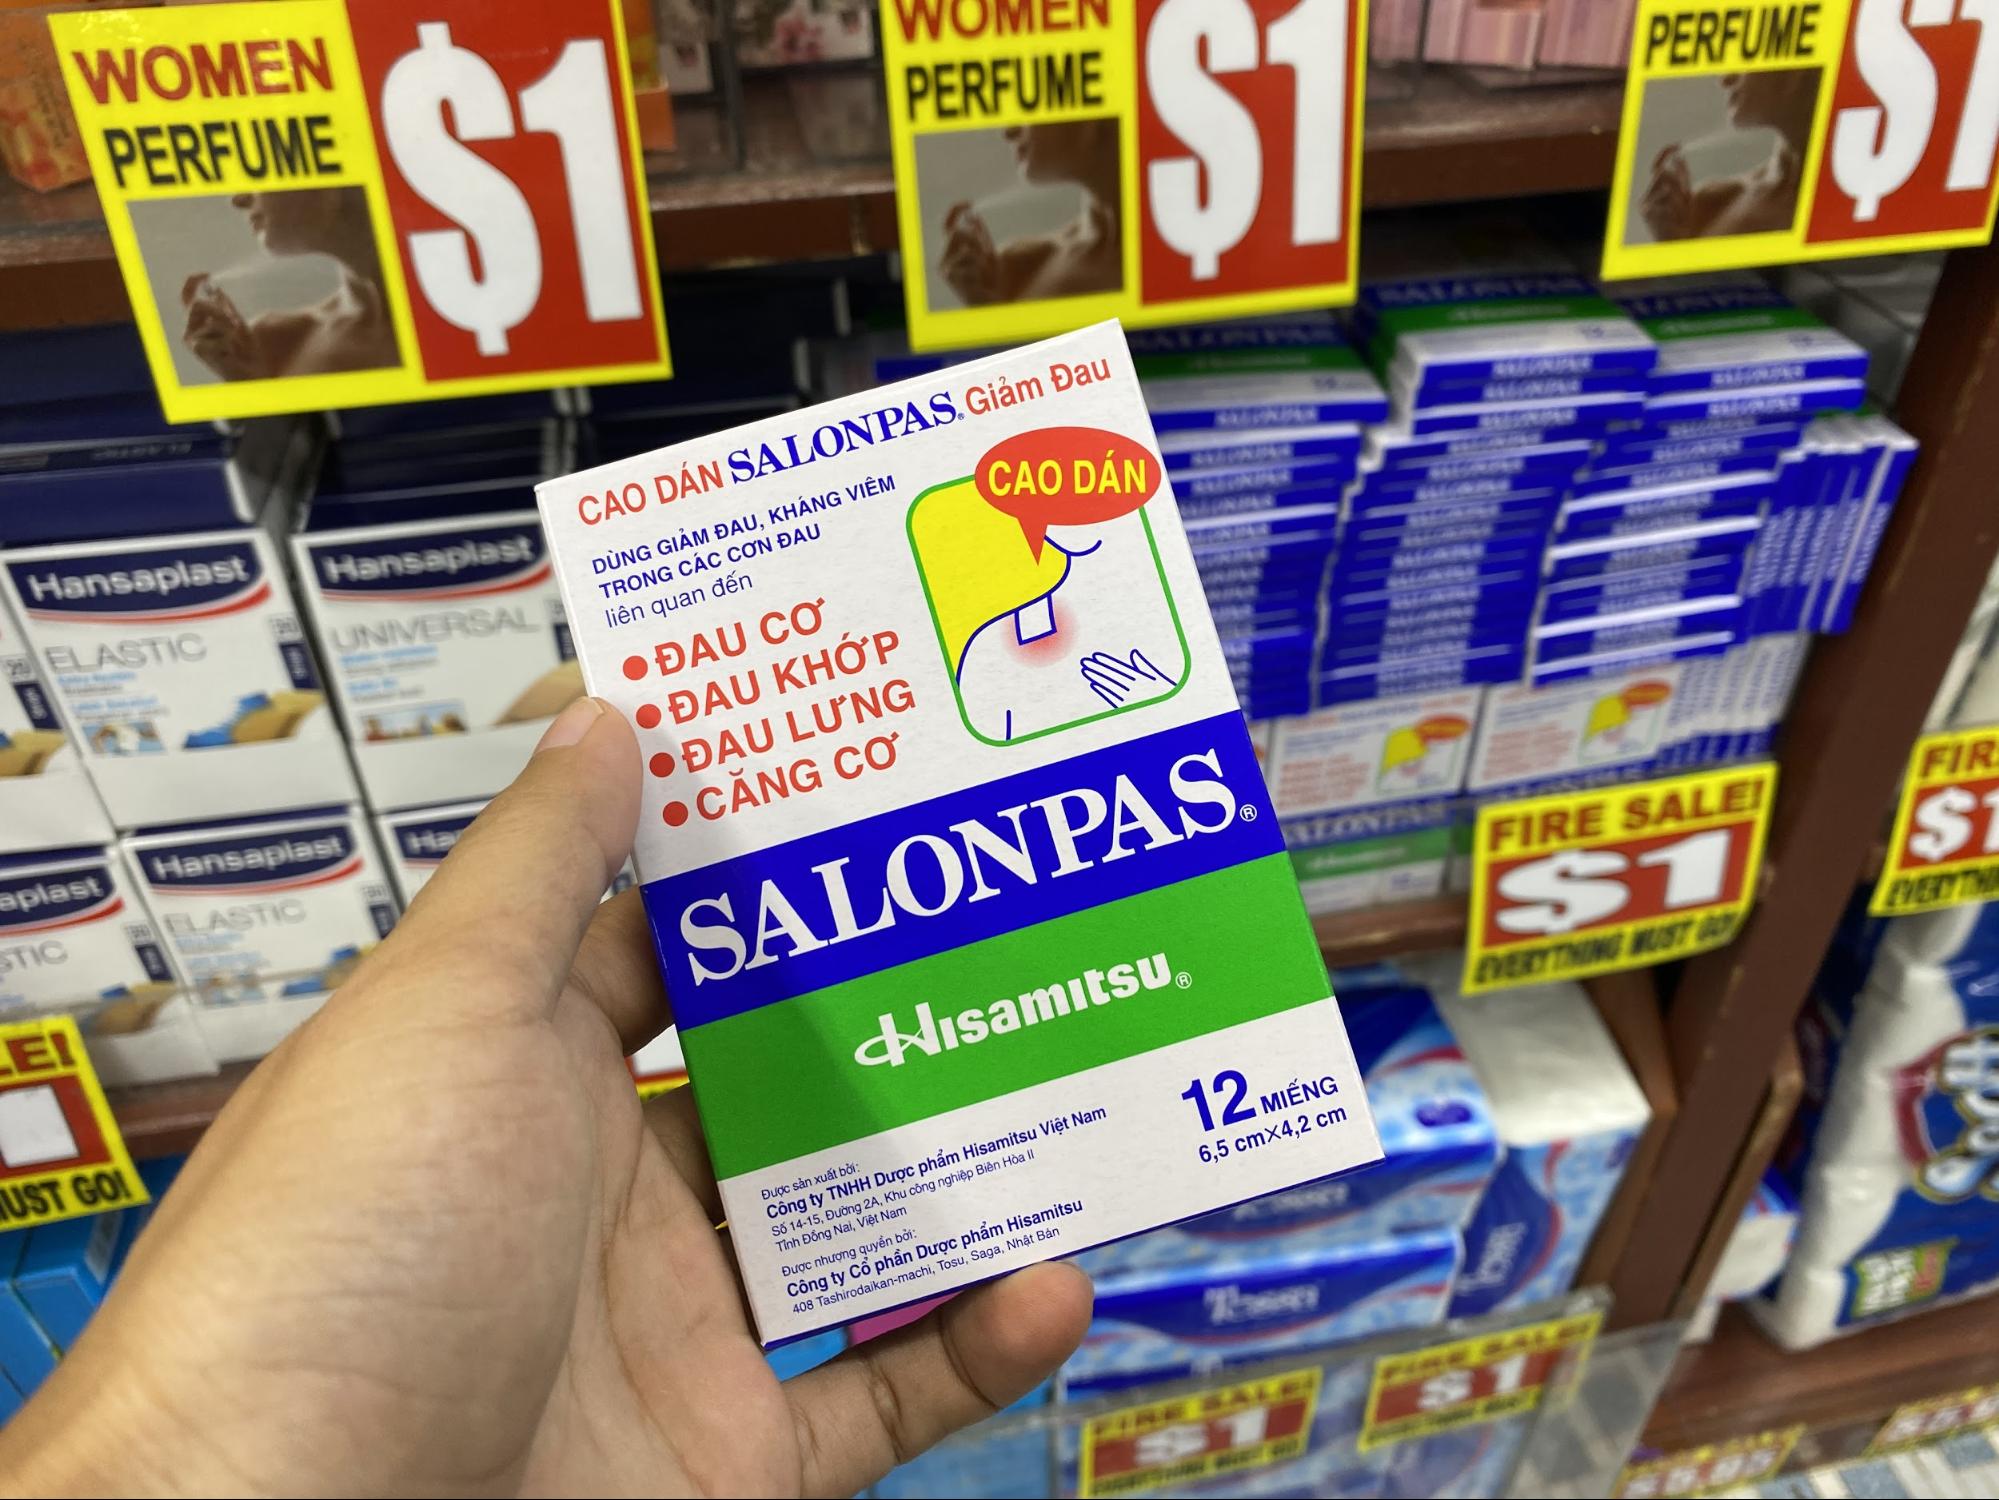 Salonpas pain relief patches at the Value Dollar store.